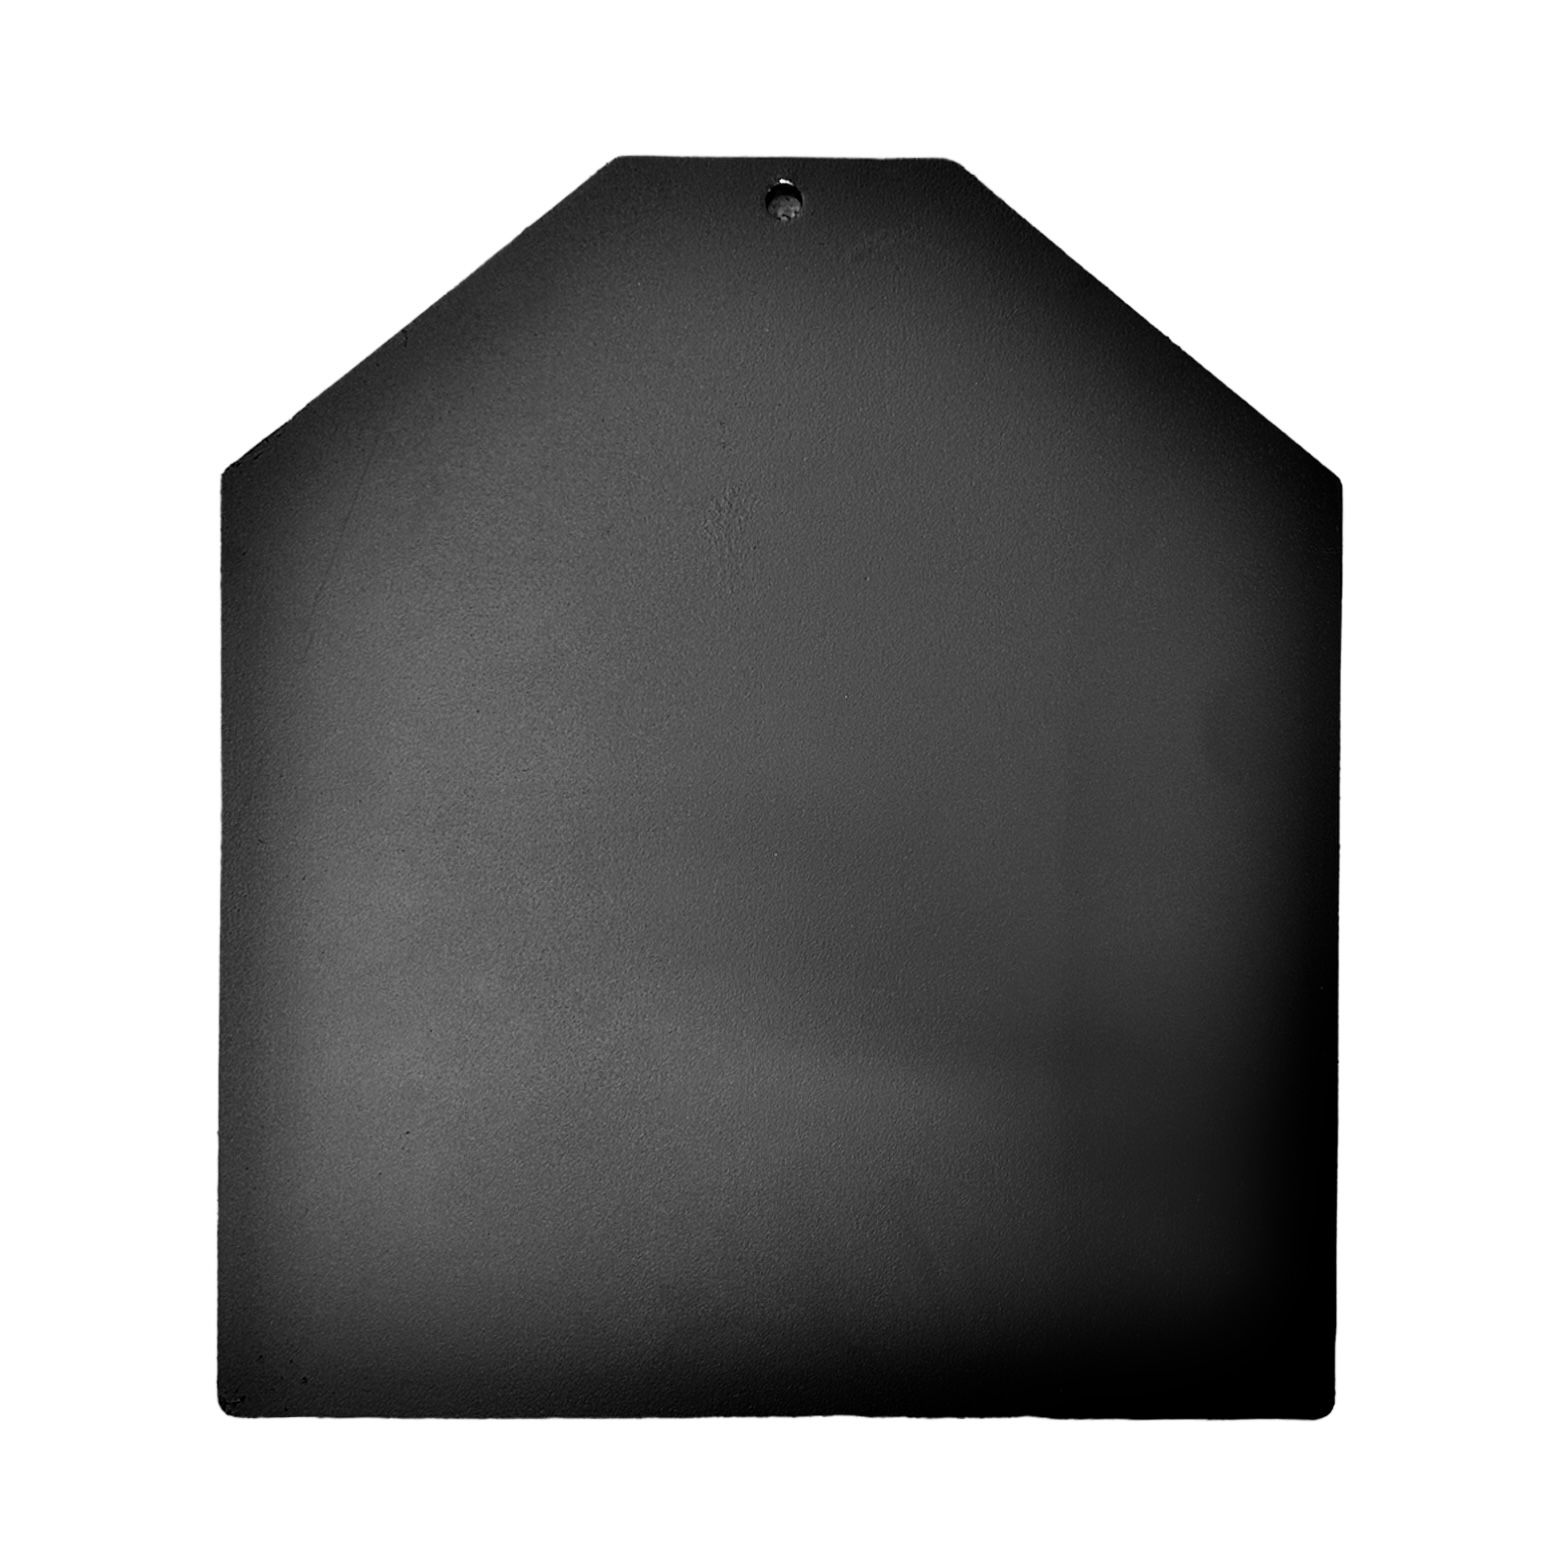 Black Stealth - Training Plates for Plate Carriers (2pc x 4kg)